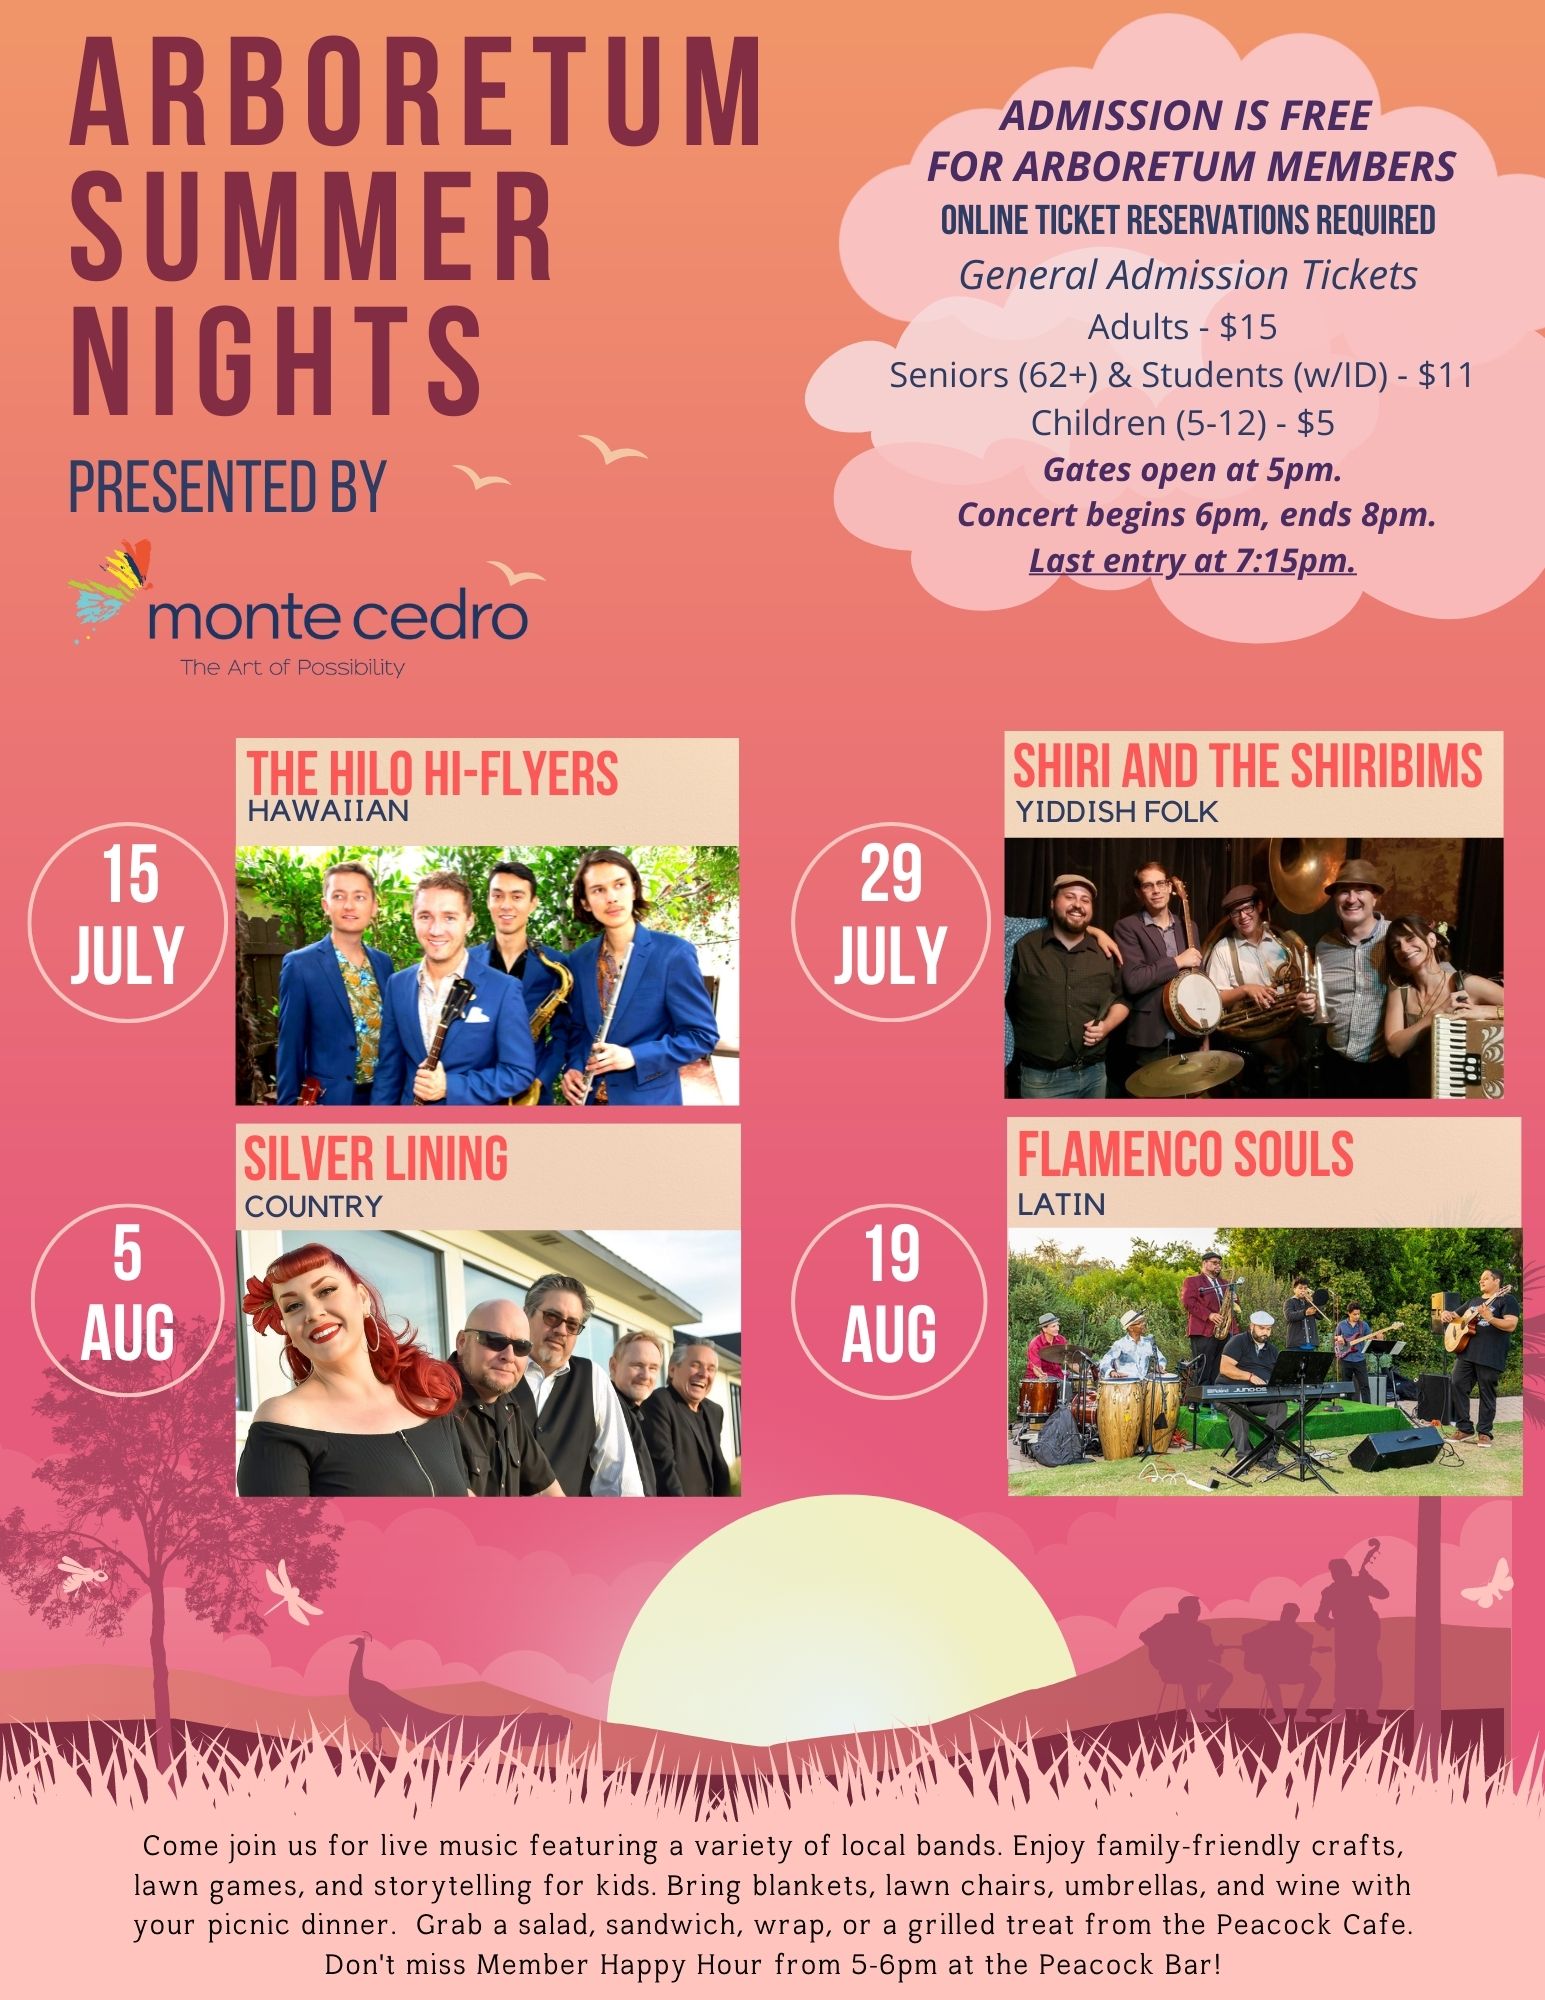 Summer Nights at the Arboretum flyer for concerts